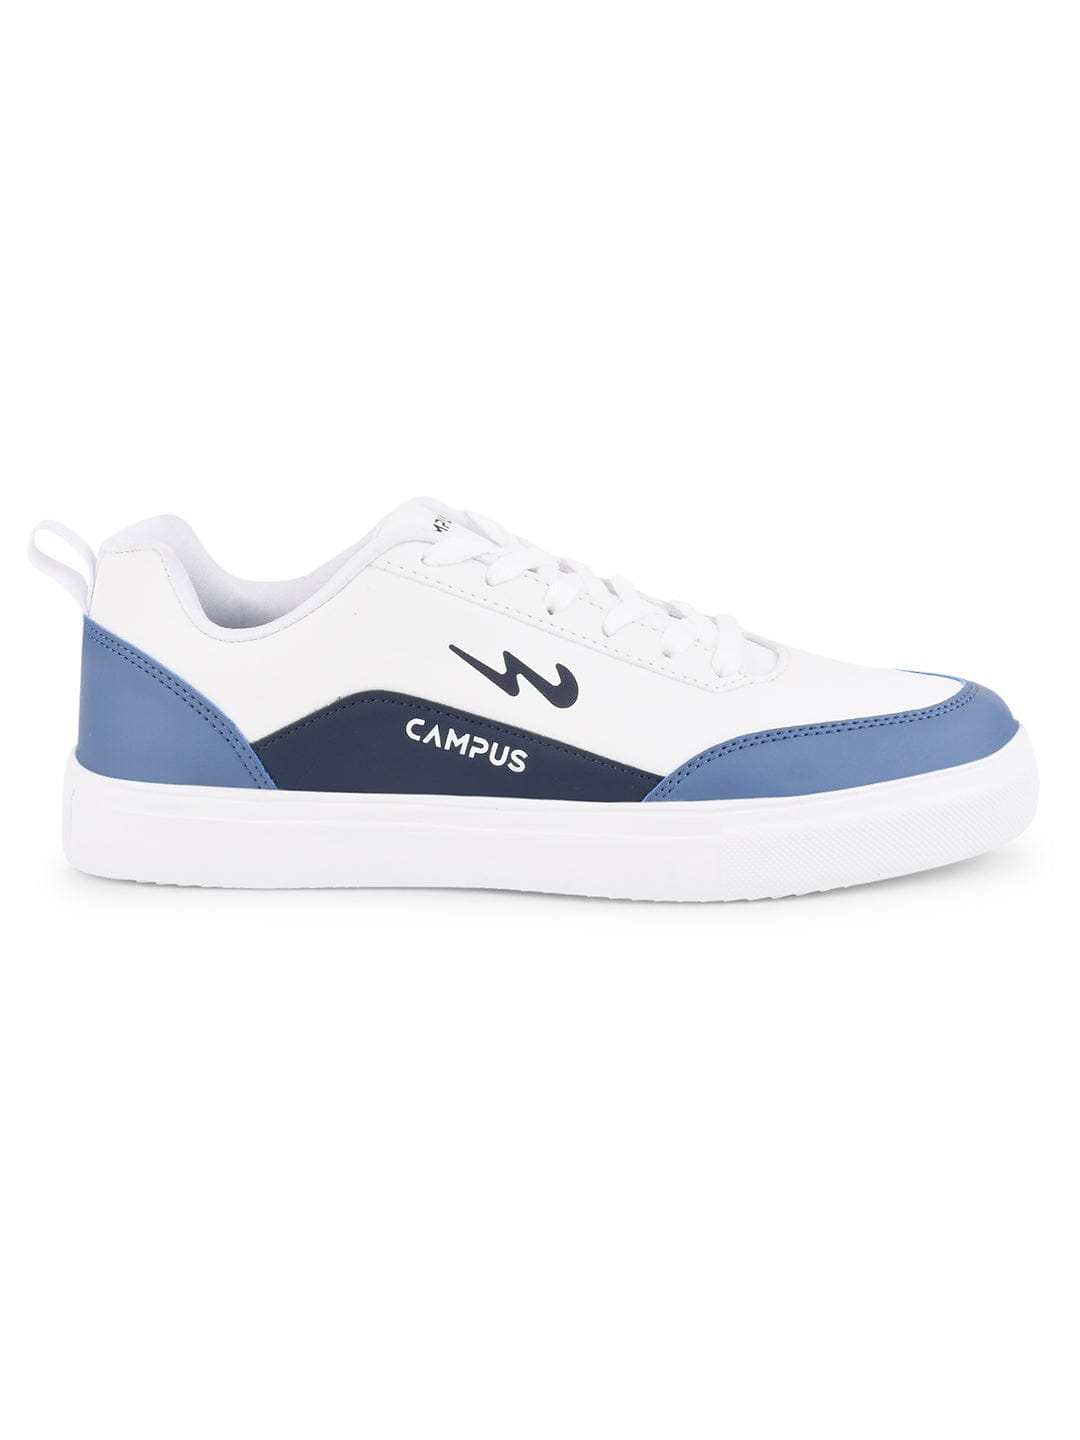 Buy D-SNEAKERZ Shoes for Men Casual Sneakers for Boys Running and Walking  Light Weight New Model Juta for Gents Chalk White Online at Lowest Price  Ever in India | Check Reviews &